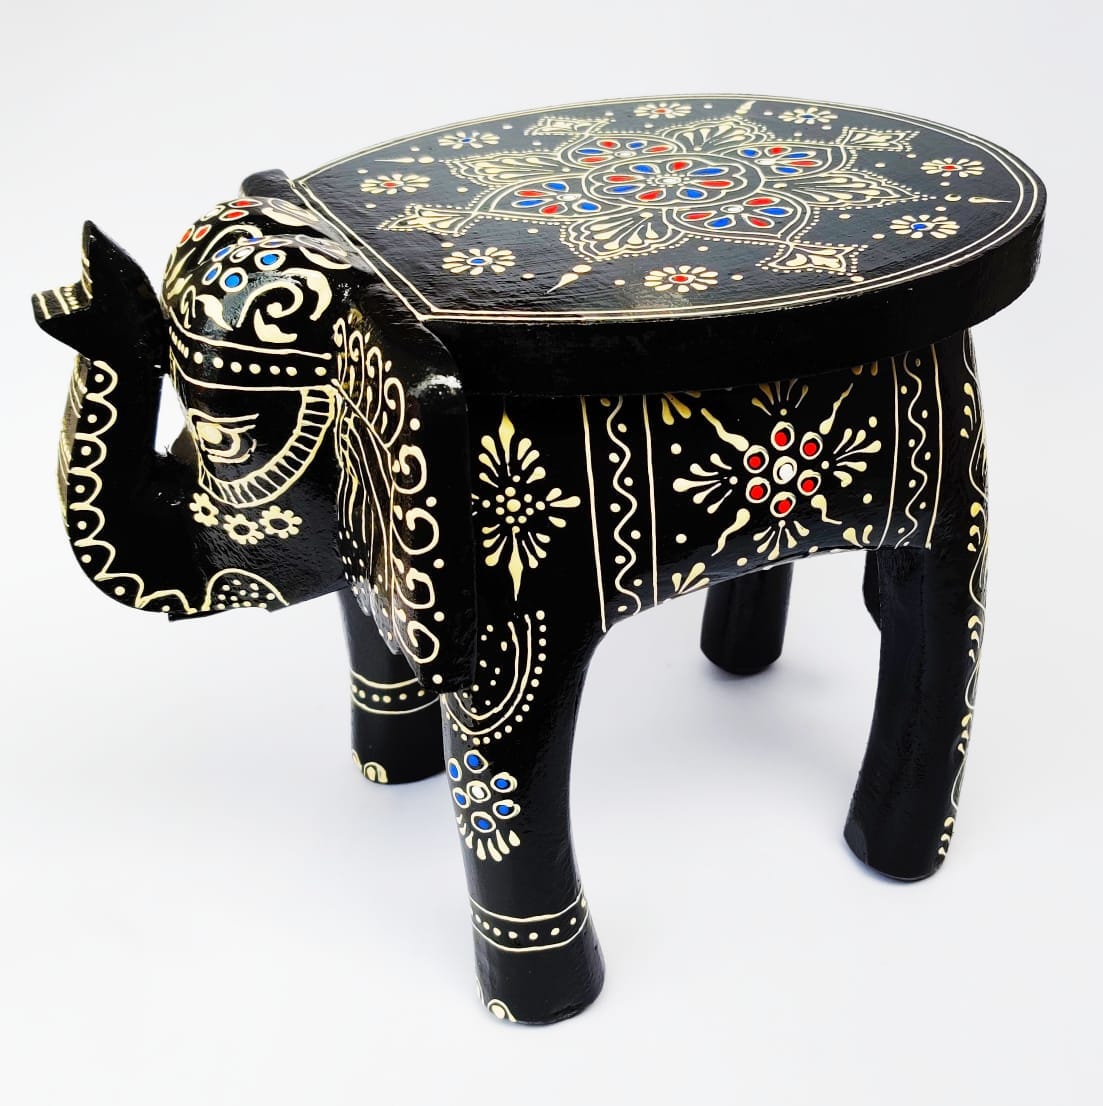 LAMANSH ® event decoration Assorted colors / Wood LAMANSH Handcrafted and Emboss Painted Colorful Wooden Elephant Shape Stool for Indian wedding events decoration (8 Inches Height, Black)